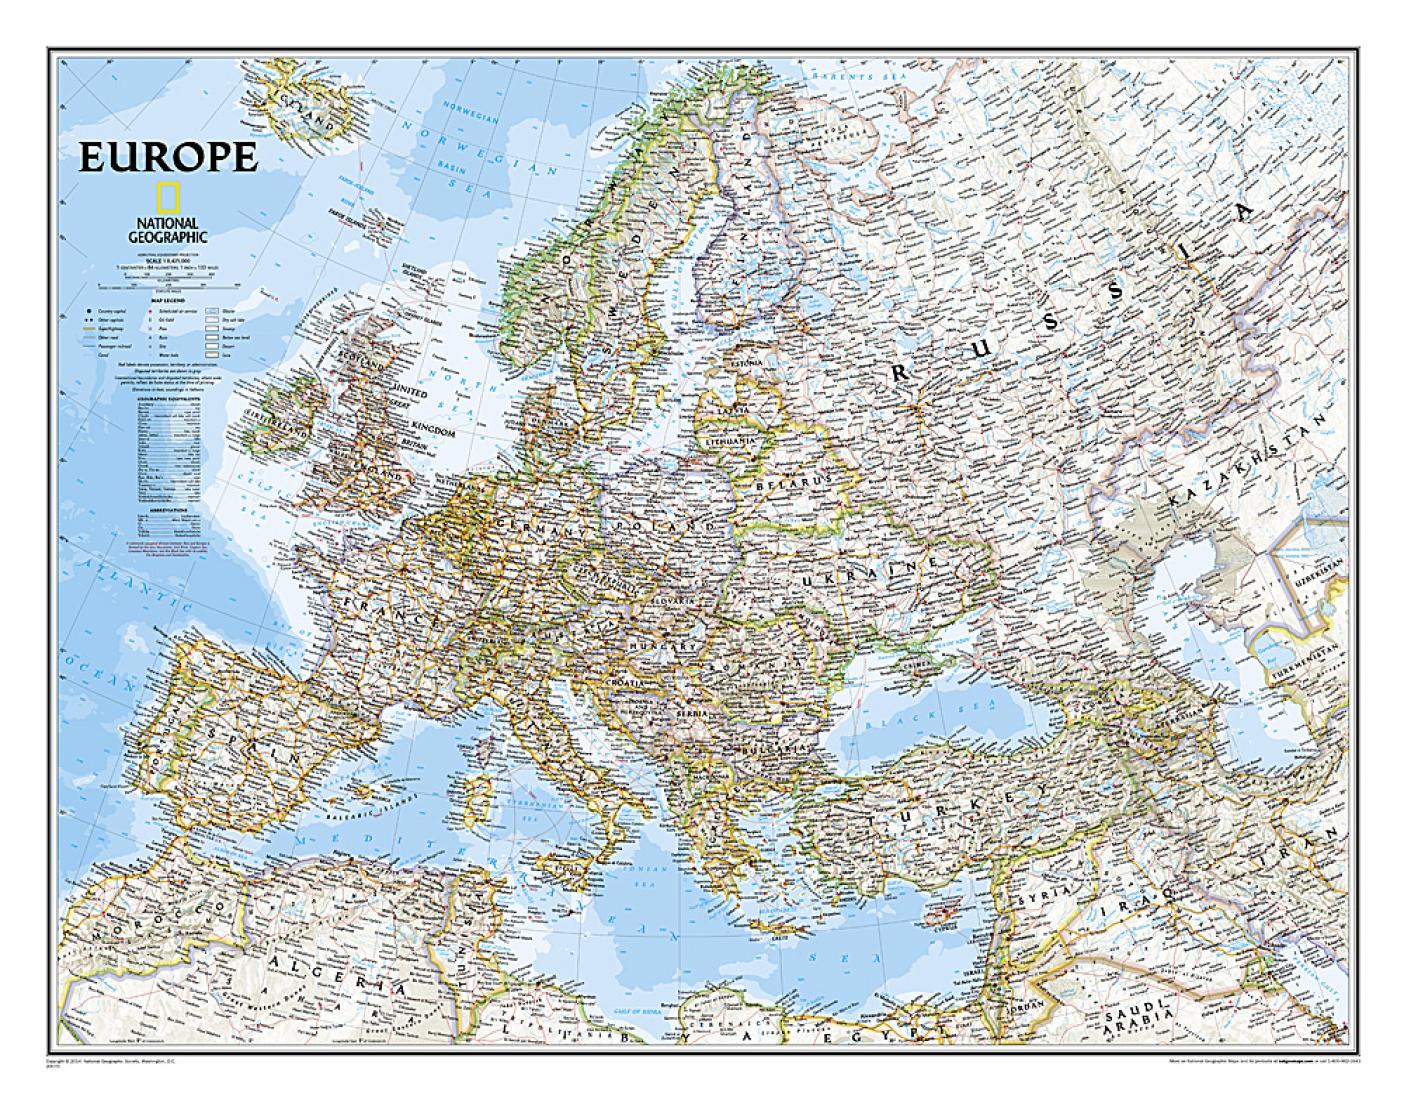 Europe classic : wall map